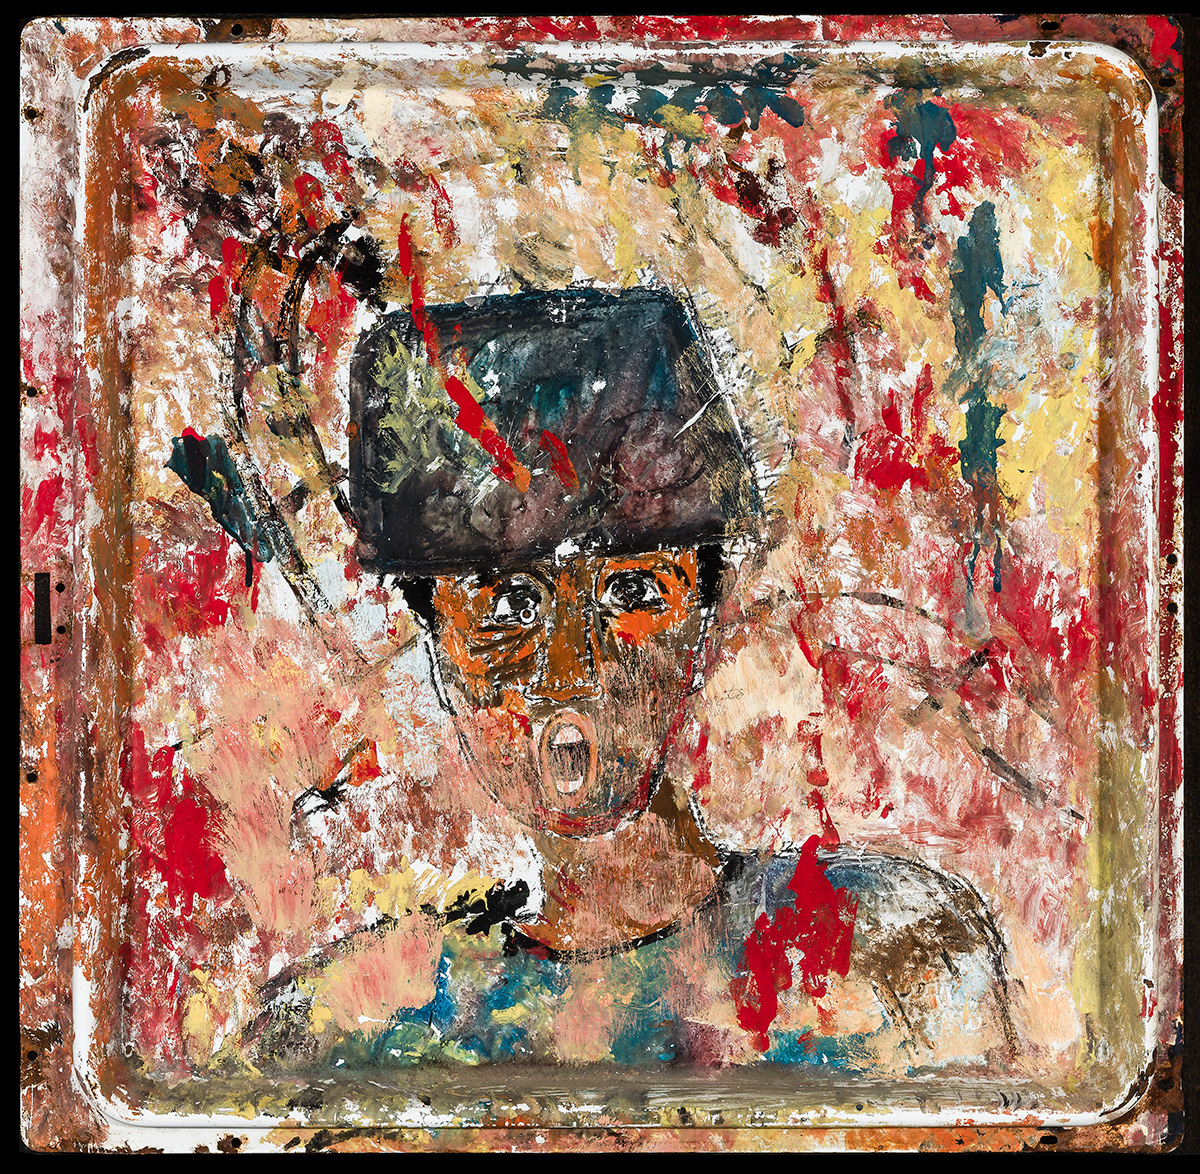 Oil paint on enameled tray, this almost abstracted piece features a mans face with a helmet on. His mouth is open and he appears to be yelling. The background is abstracted strokes of yellow, red, pink and black giving the feeling of a chaotic and maybe violent scene.